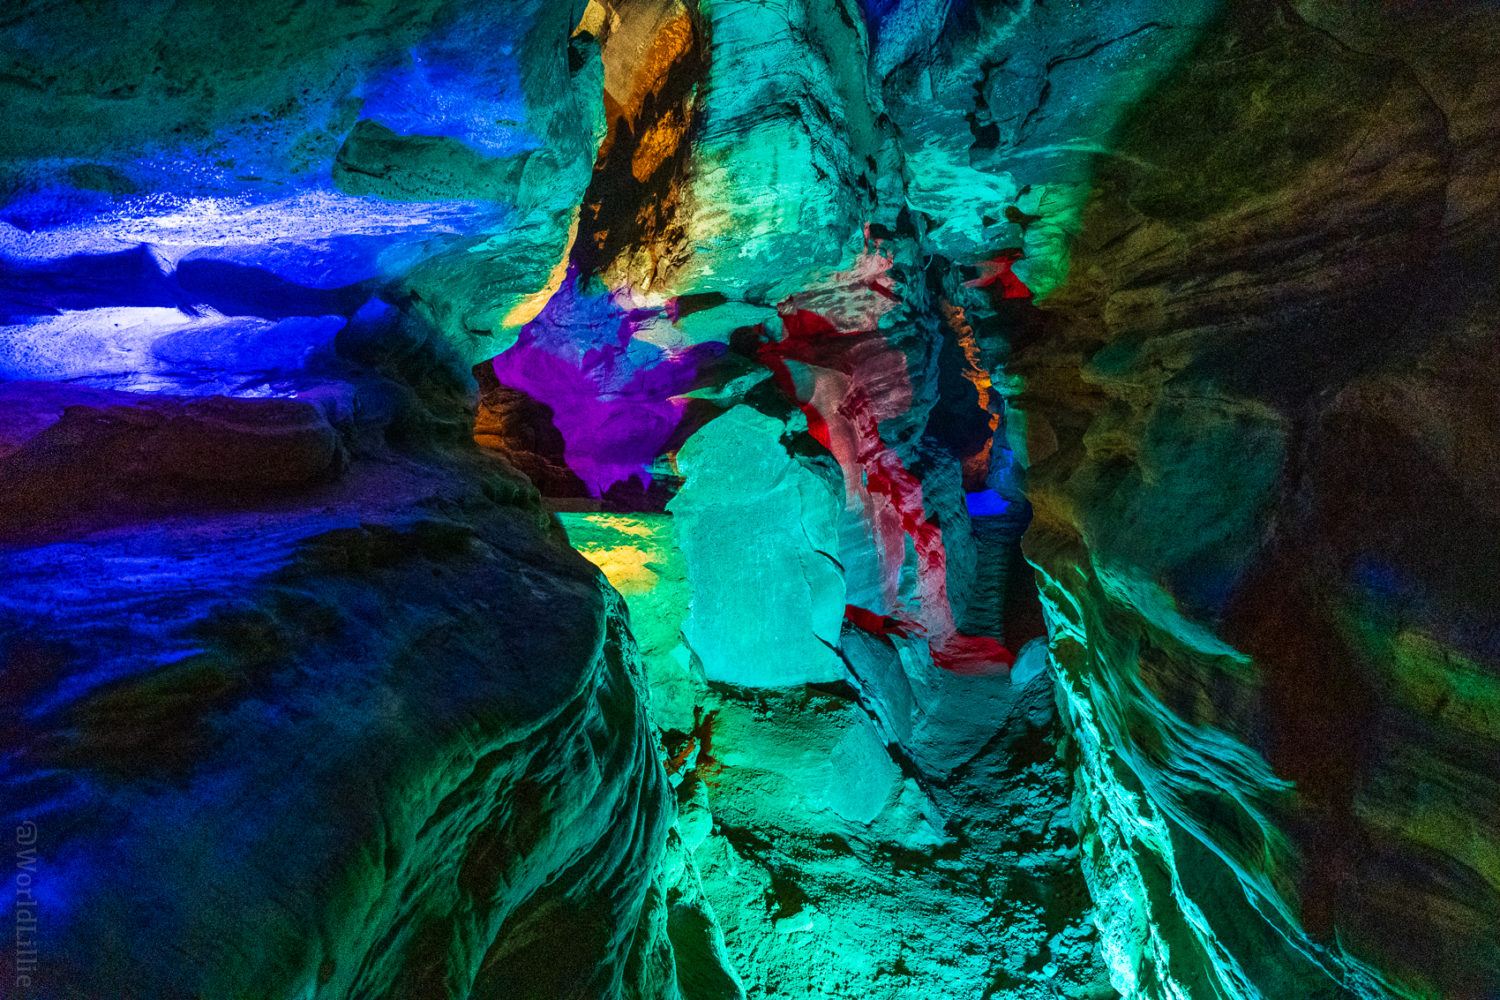 I love that teal light on the rock of the cavern walls.